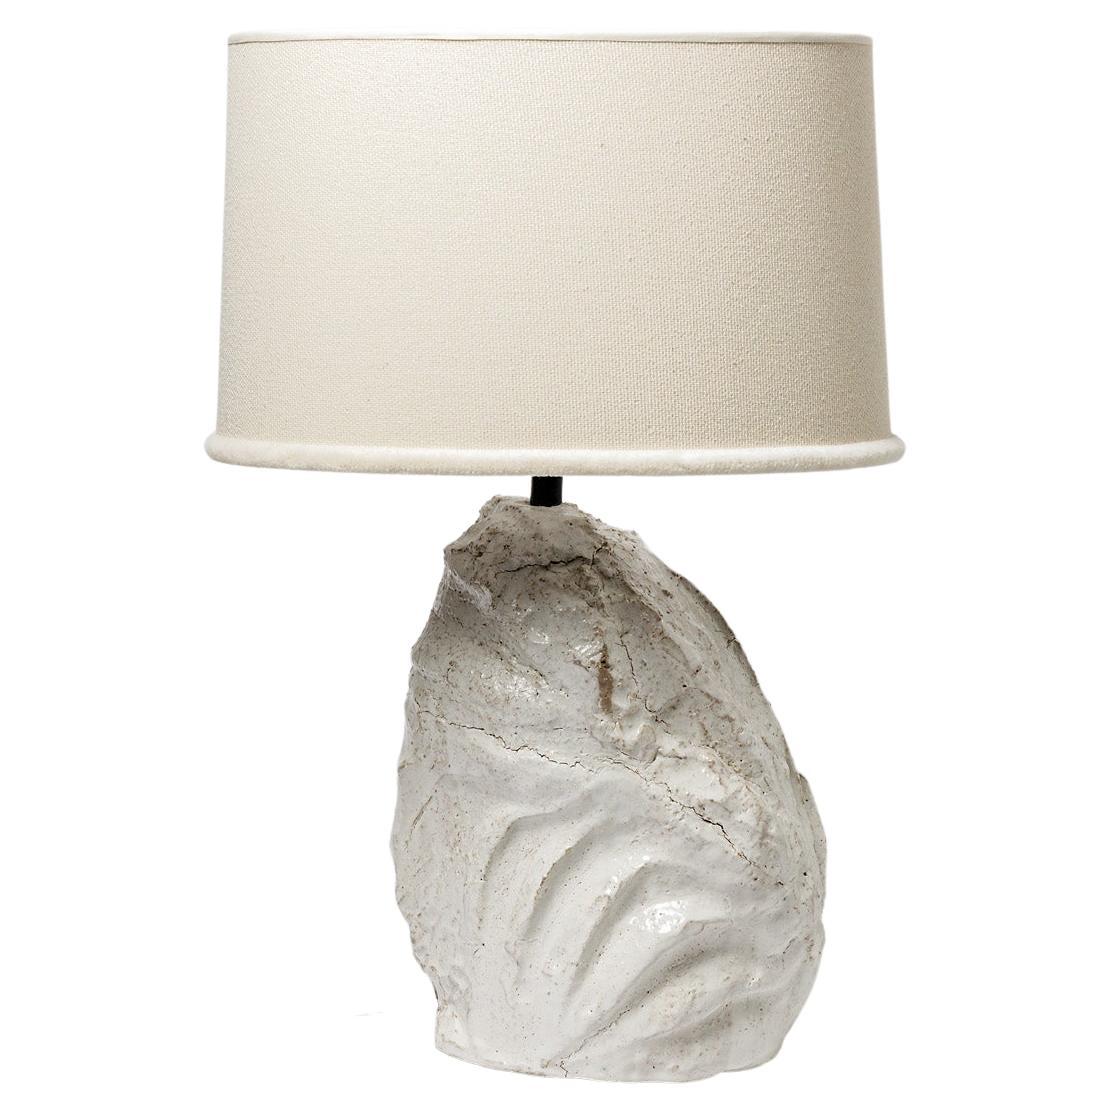 Ceramic Table Lamp with White Glaze by Hervé Rousseau, 2022 / REF 7 For Sale